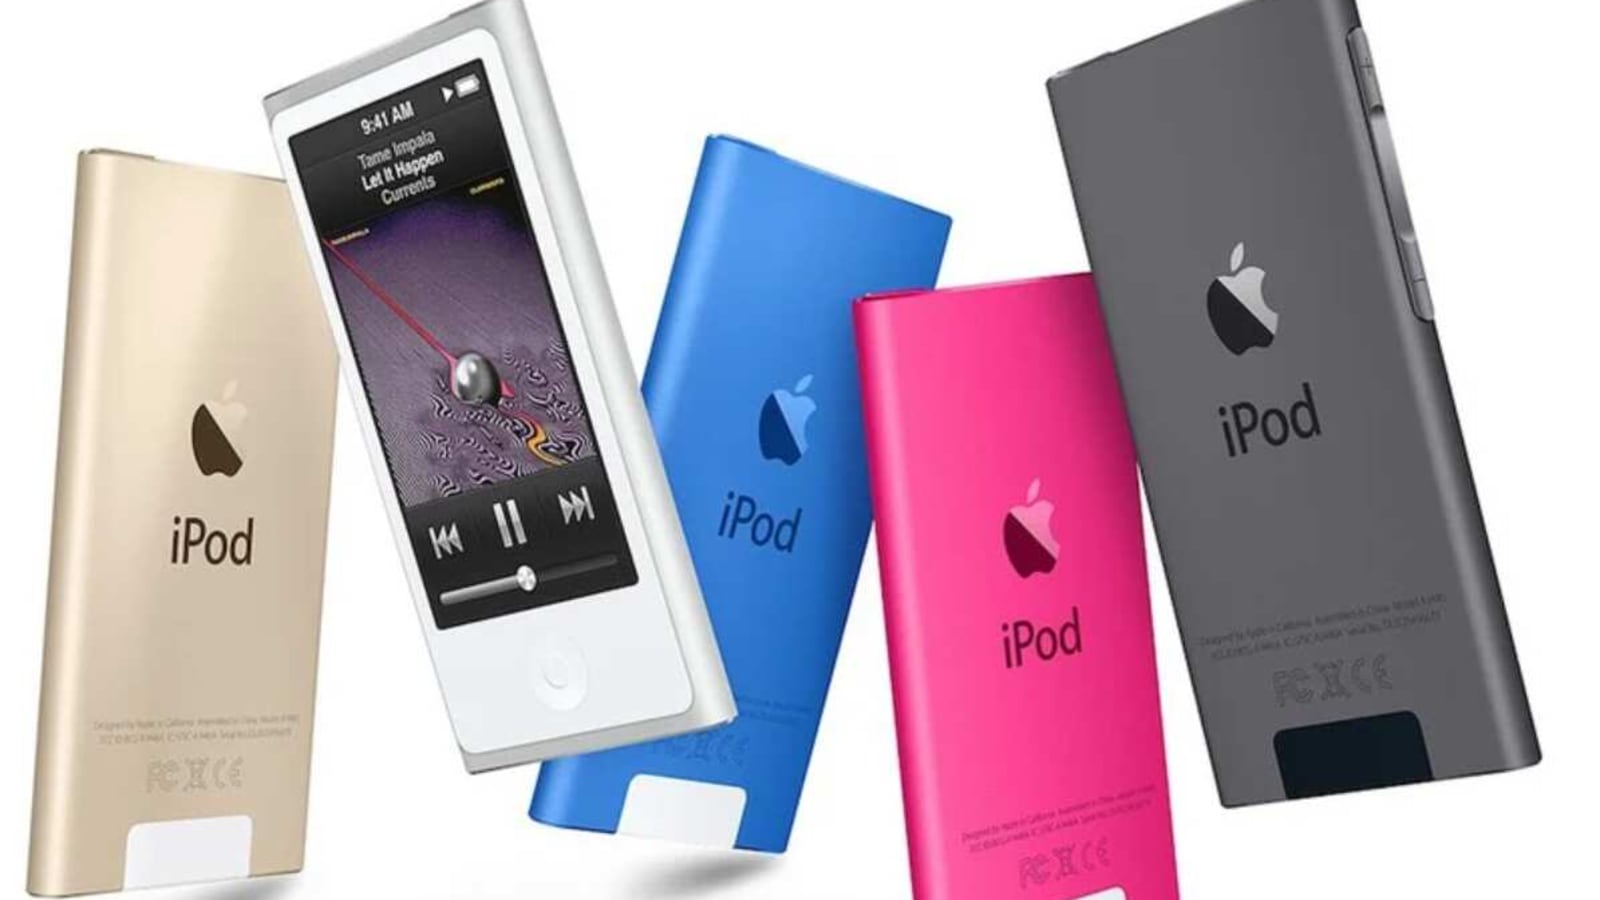 Apple's last iPod Nano model going to be declared 'vintage' soon | Tech News